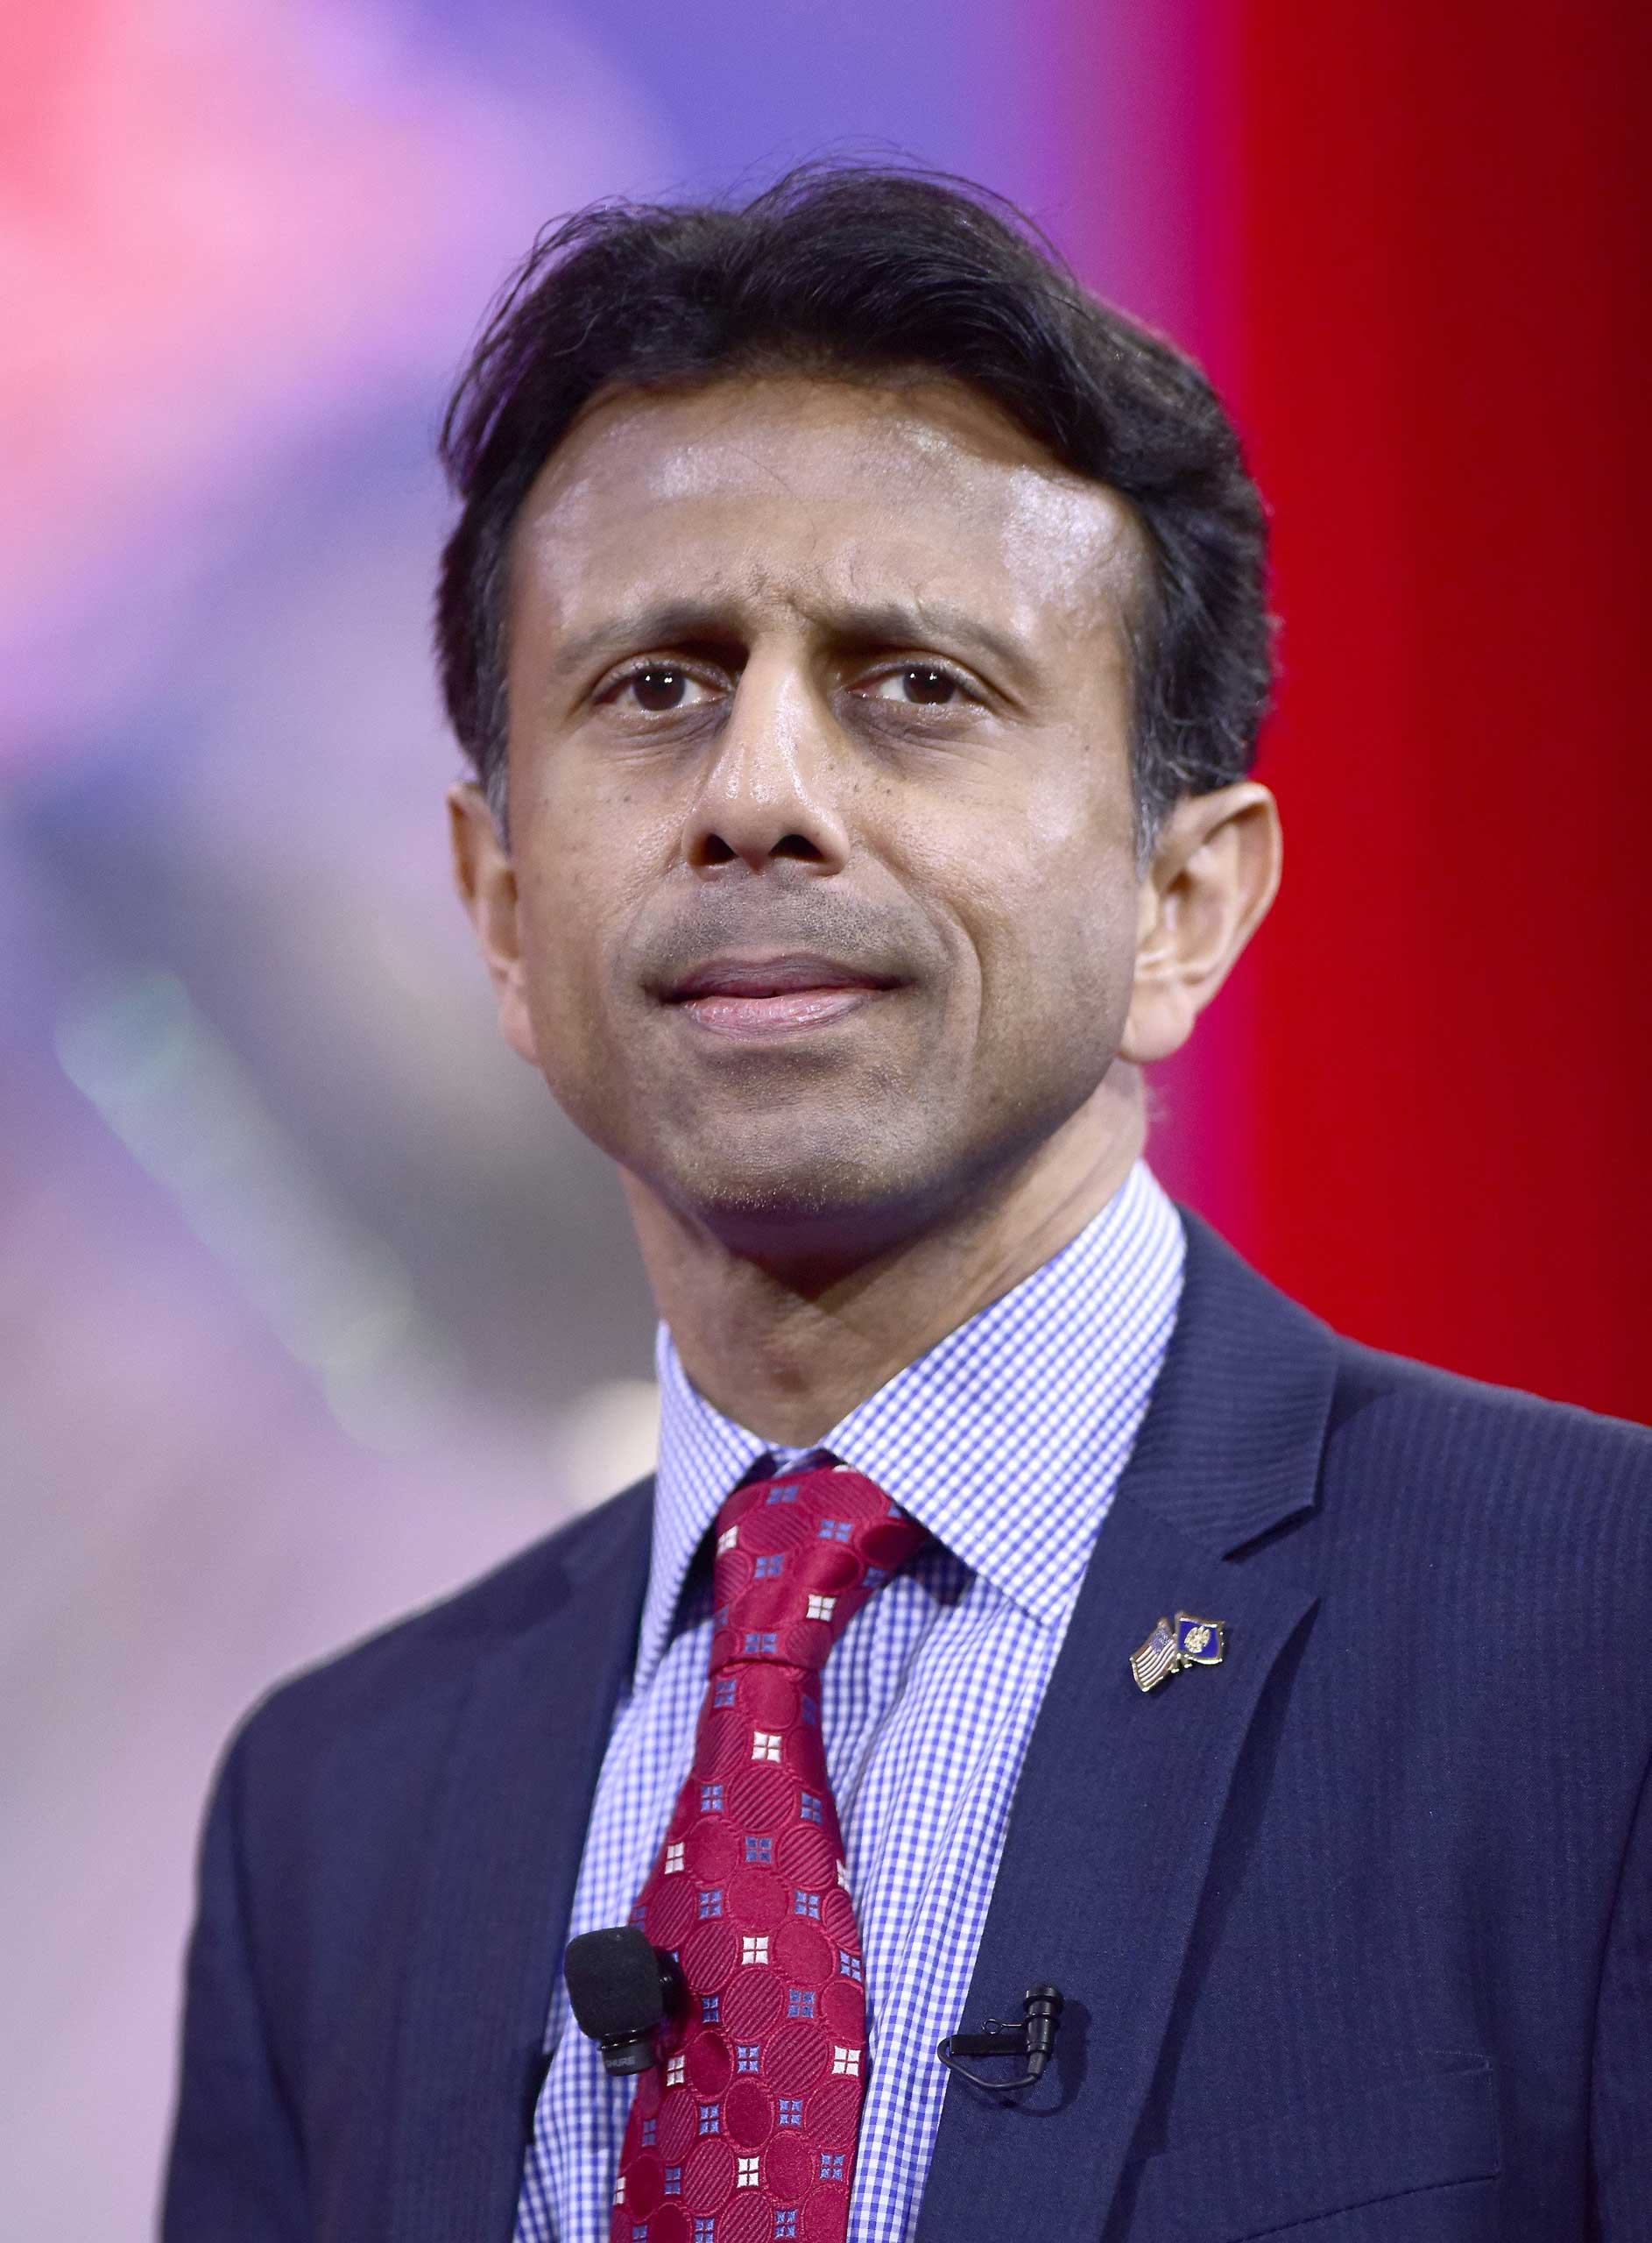 Louisiana Governor Bobby Jindal speaks at the Conservative Political Action Conference (CPAC) in National Harbor, Md. on Feb. 26, 2015. (Ron Sachs—dpa/Corbis)